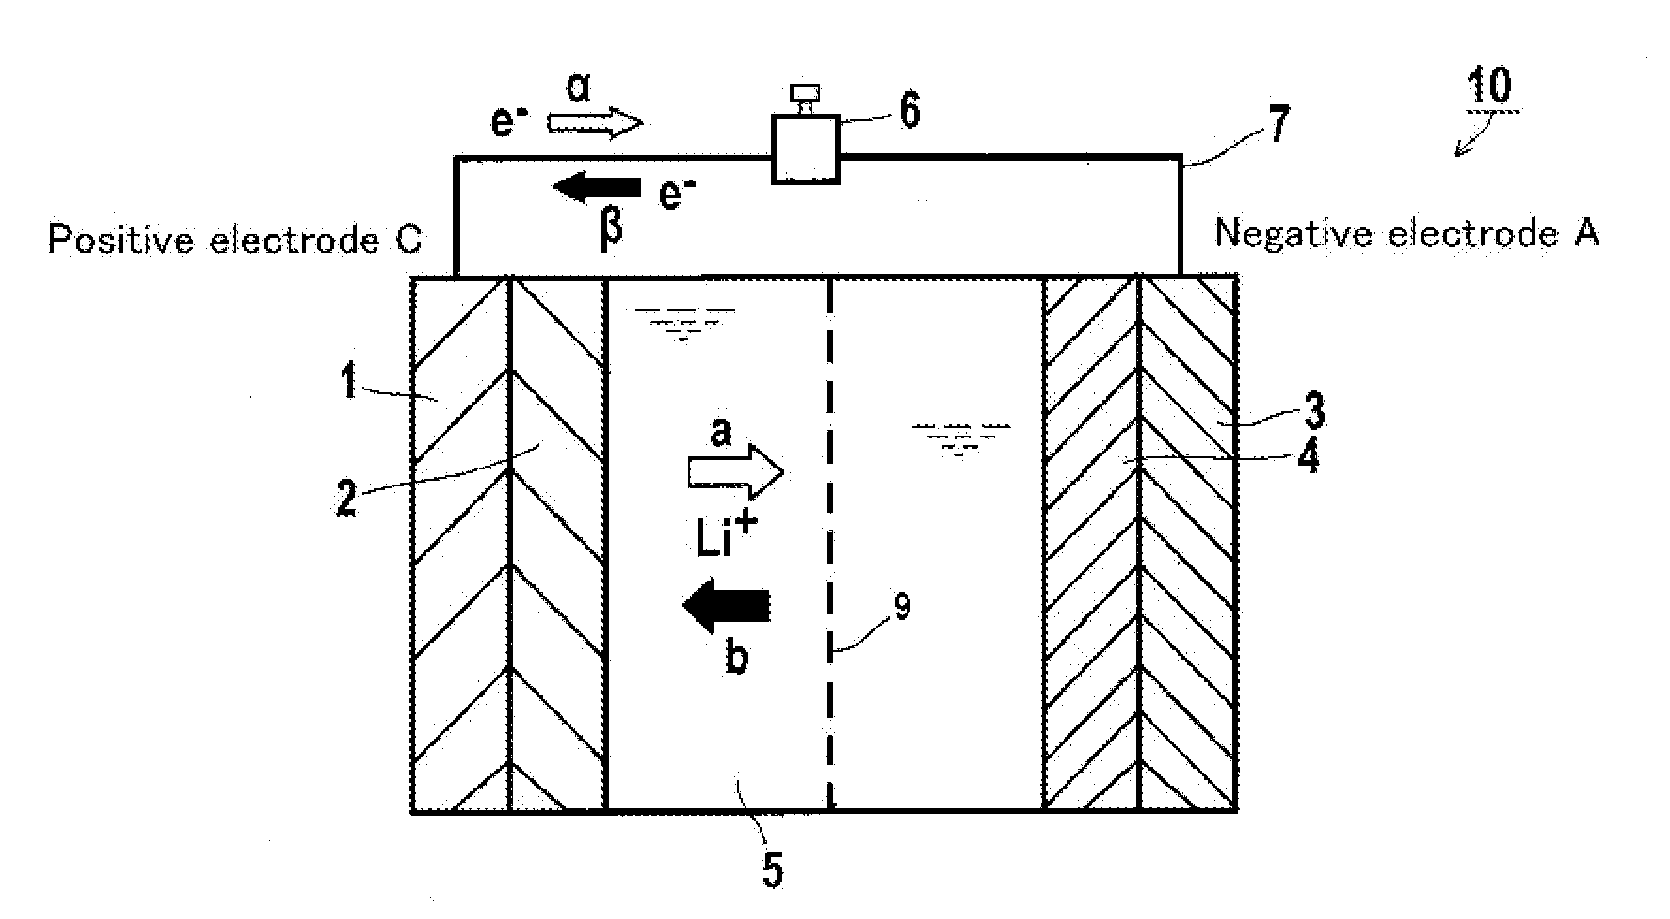 Non-aqueous liquid electrolyte for secondary battery and secondary battery